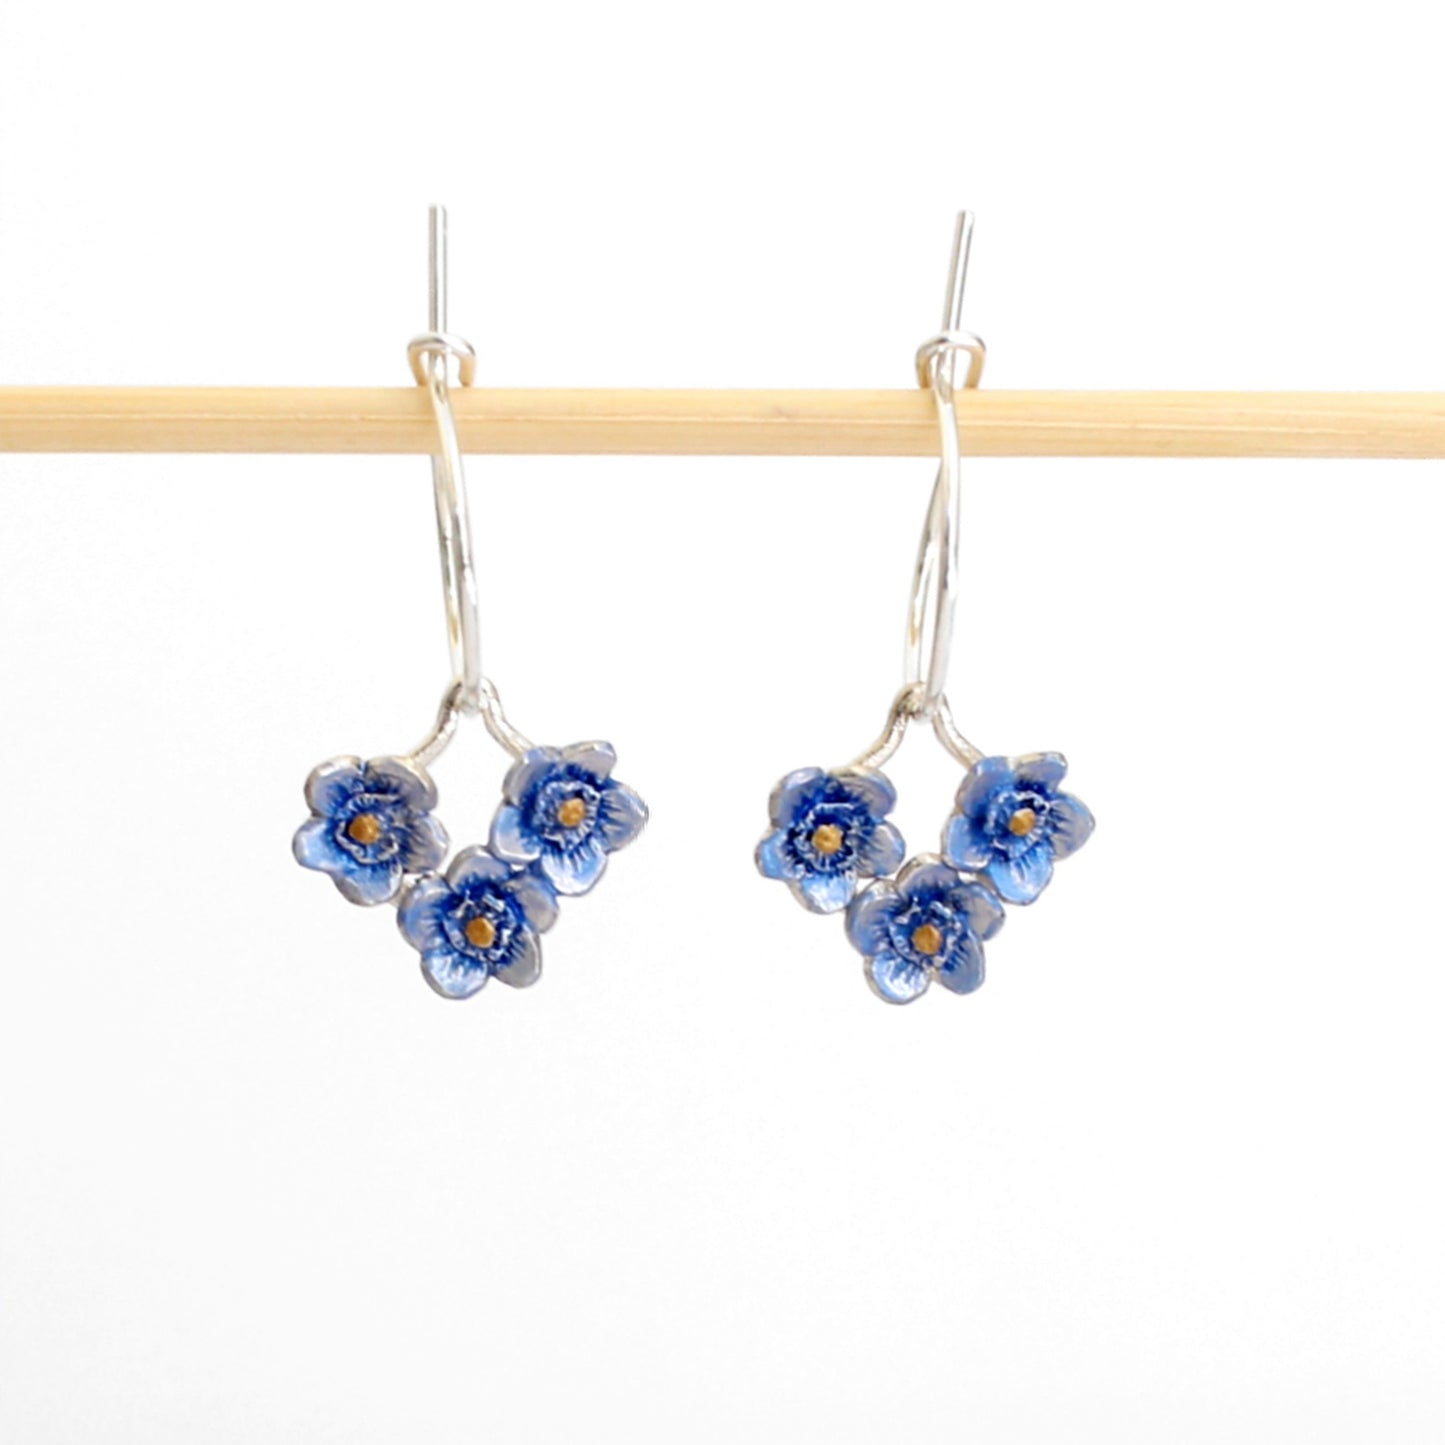 Forget Me Not Trio Earrings